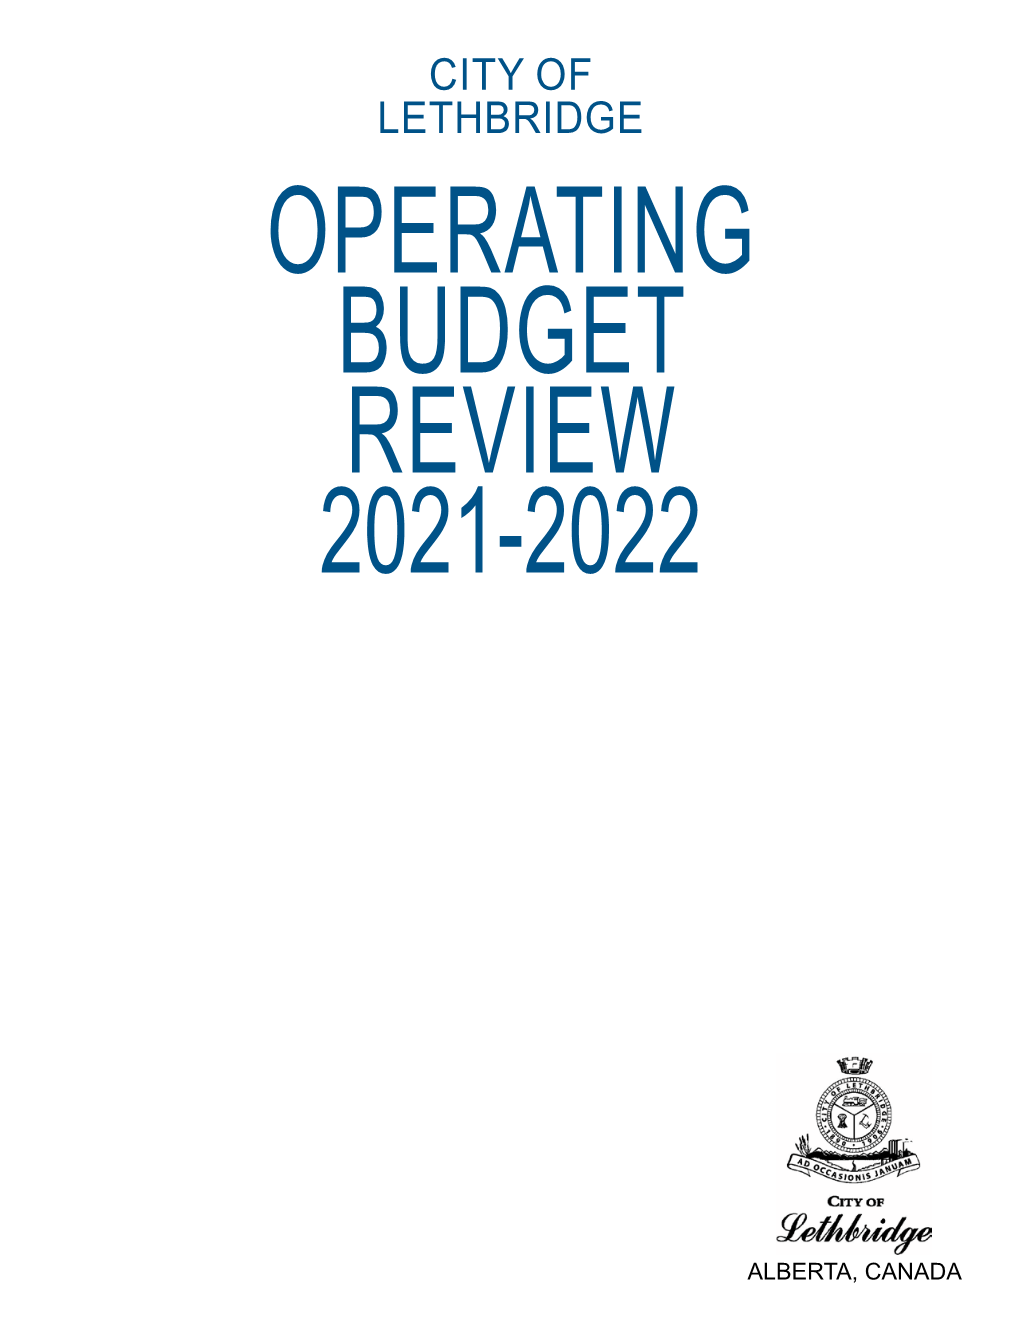 View the 2021-2022 Operating Budget Review Final